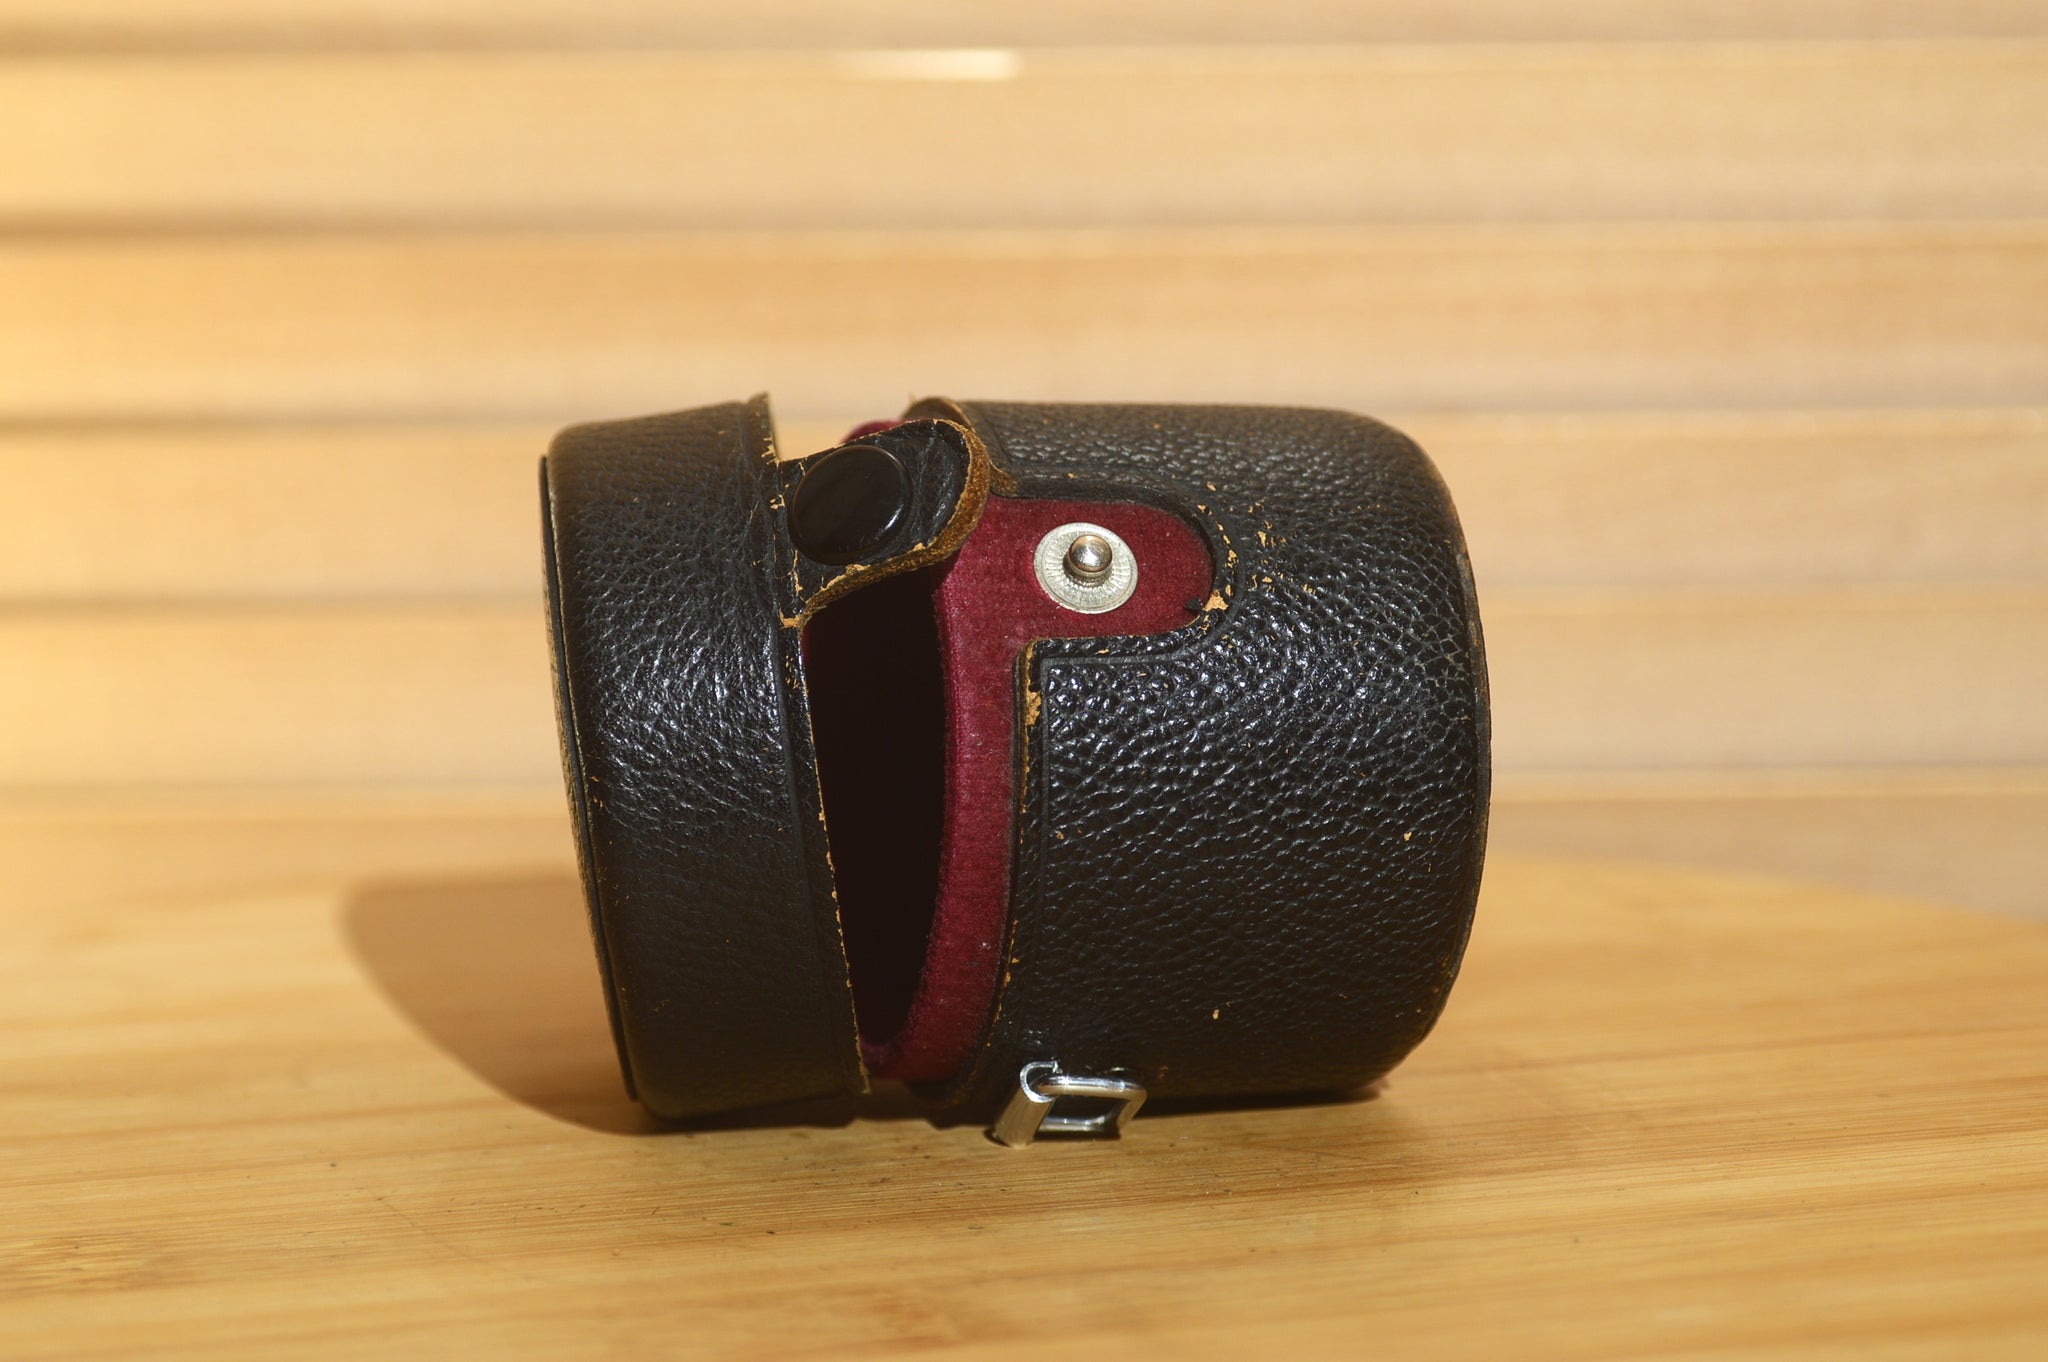 Fantastic Takumar 28mm f3.5 Hard Leather Lens Case. Perfect for protecting your Vintage lenses.